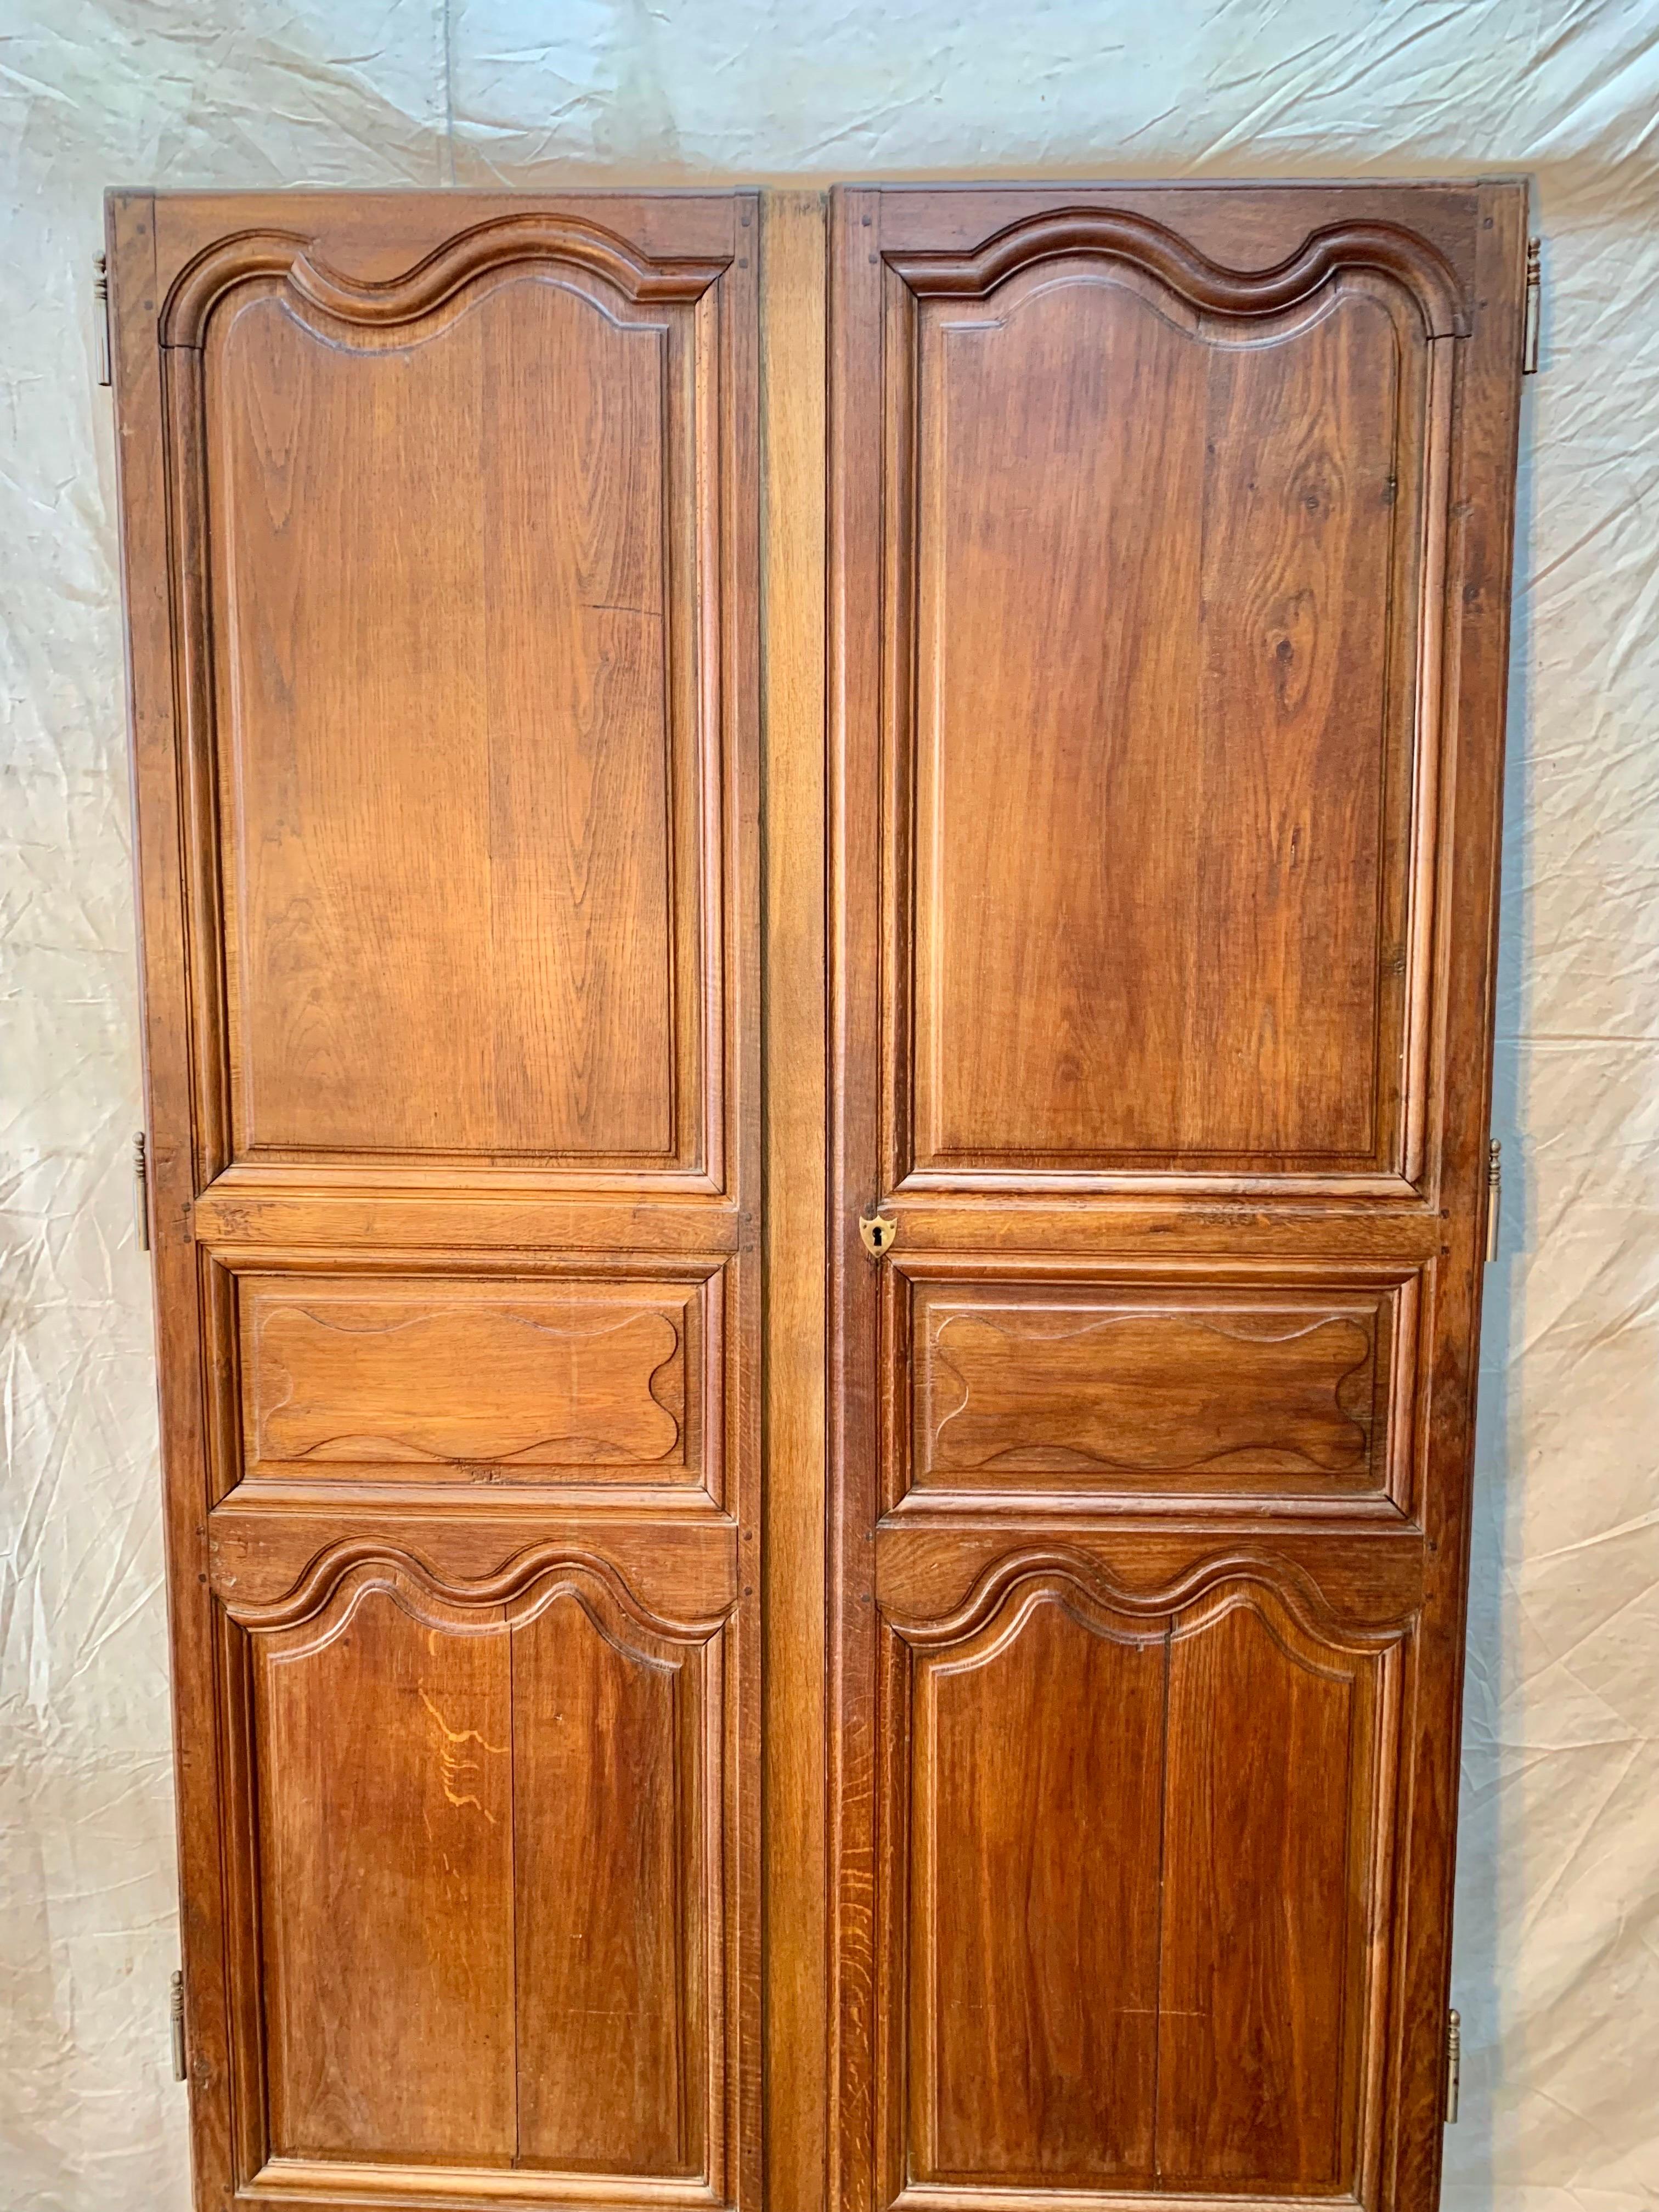 19th Century French Armoire Doors - a Pair In Good Condition For Sale In Burton, TX